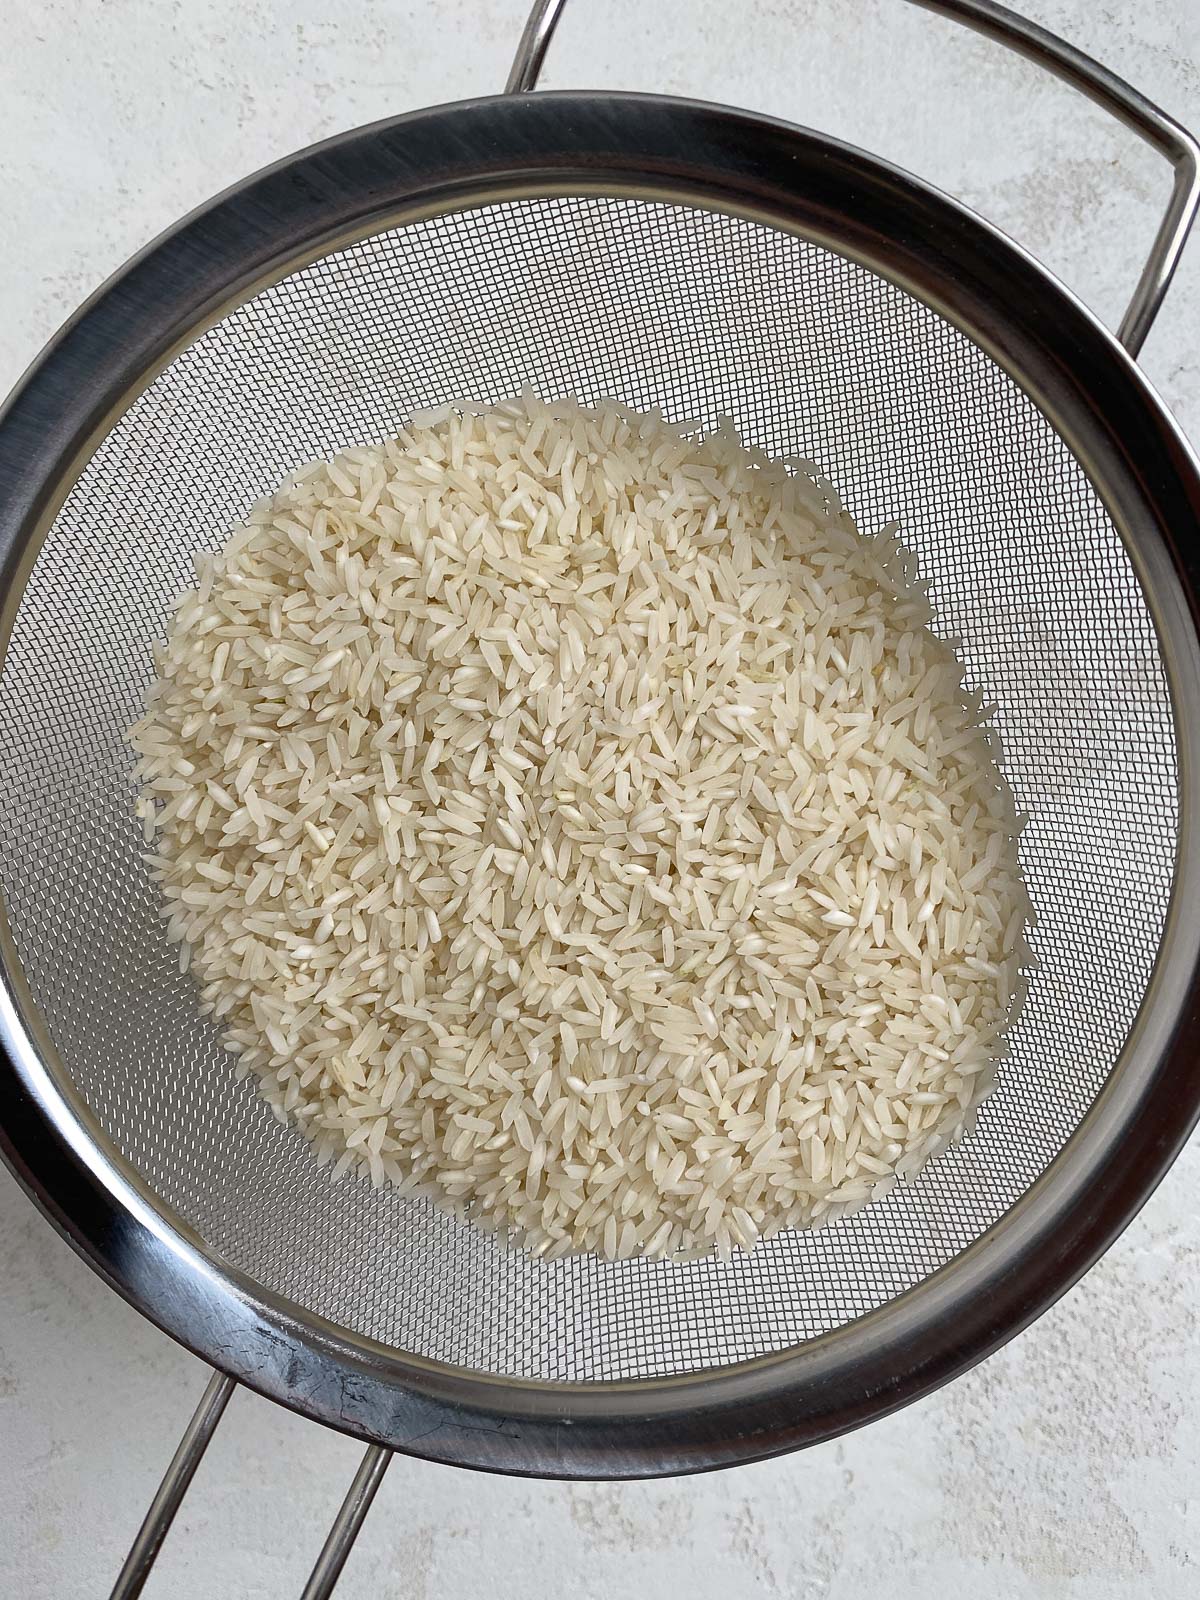 process of straining rice in collander